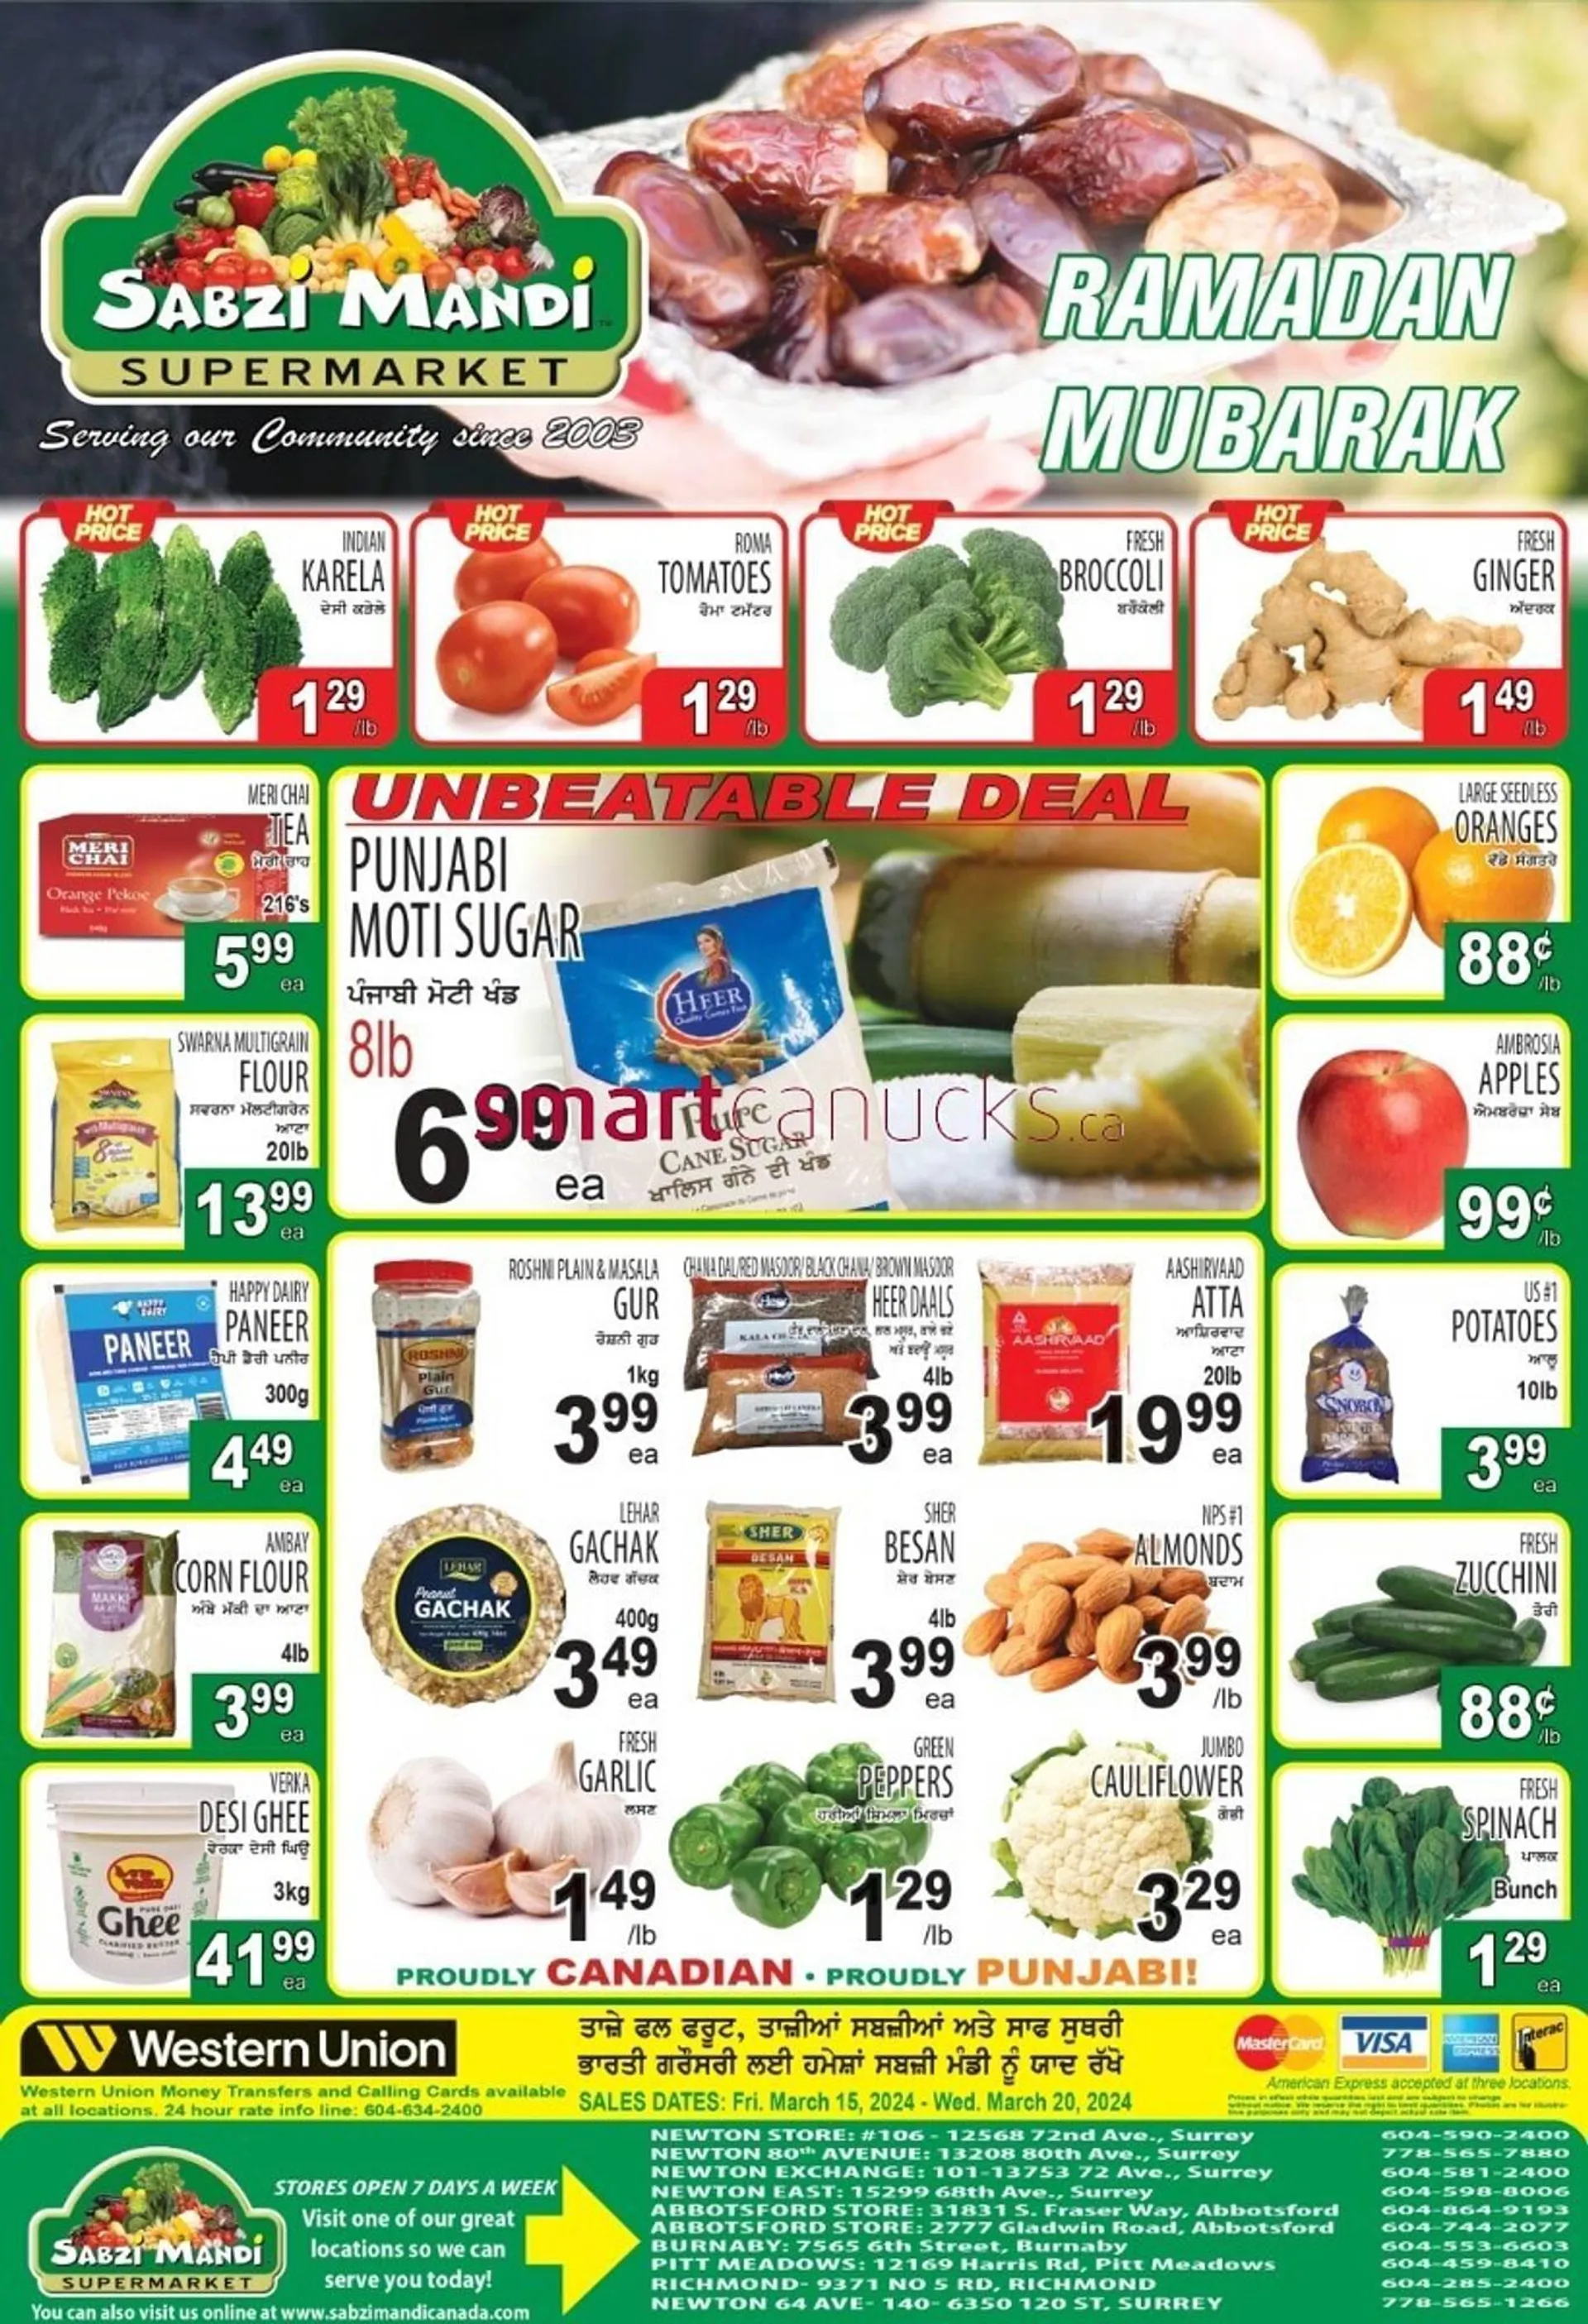 Sabzi Mandi Supermarket flyer from March 15 to March 21 2024 - flyer page 